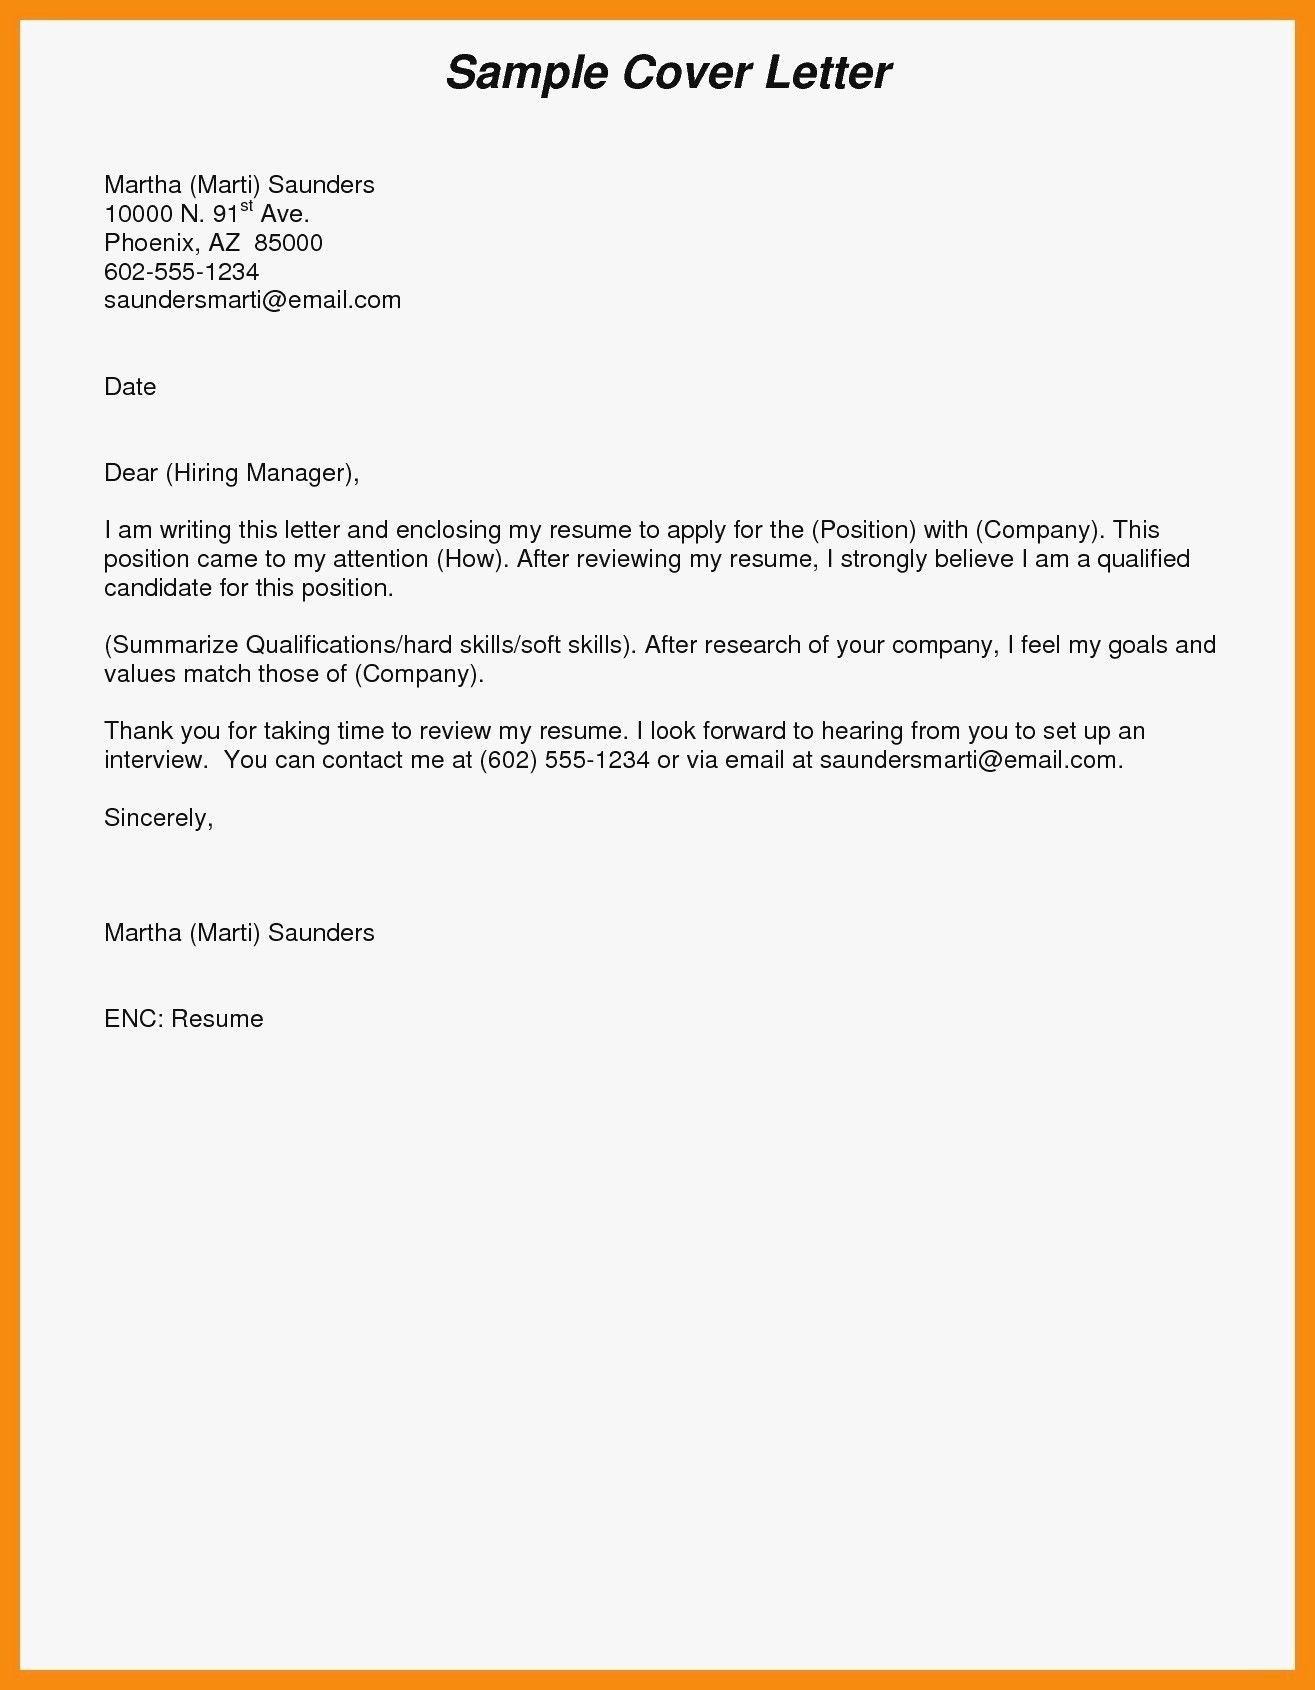 Emailing Resume and Cover Letter Message Sample 18 Email Cover Letter Ideas Email Cover Letter, Cover Letter …